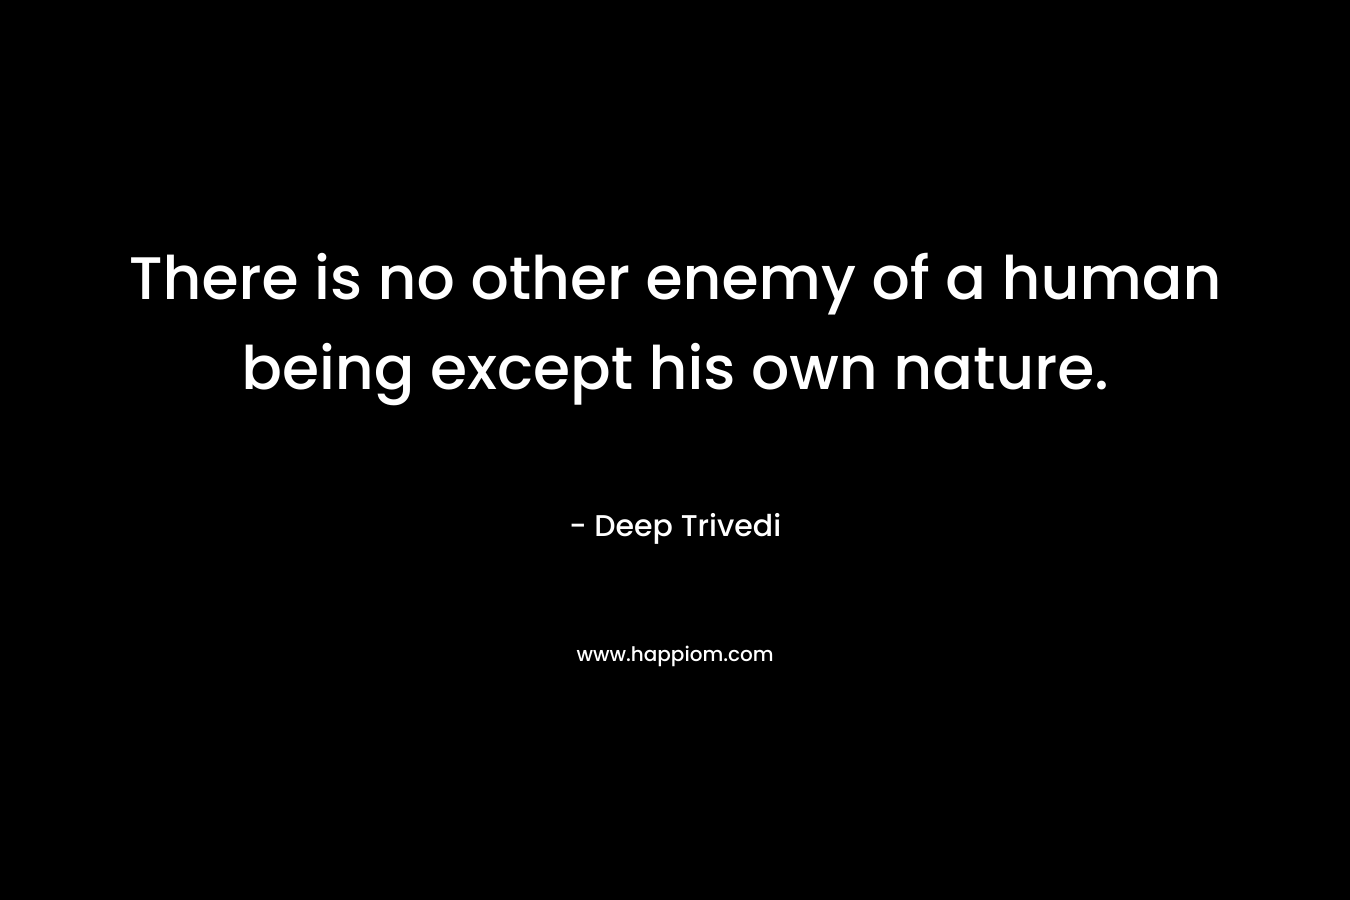 There is no other enemy of a human being except his own nature.